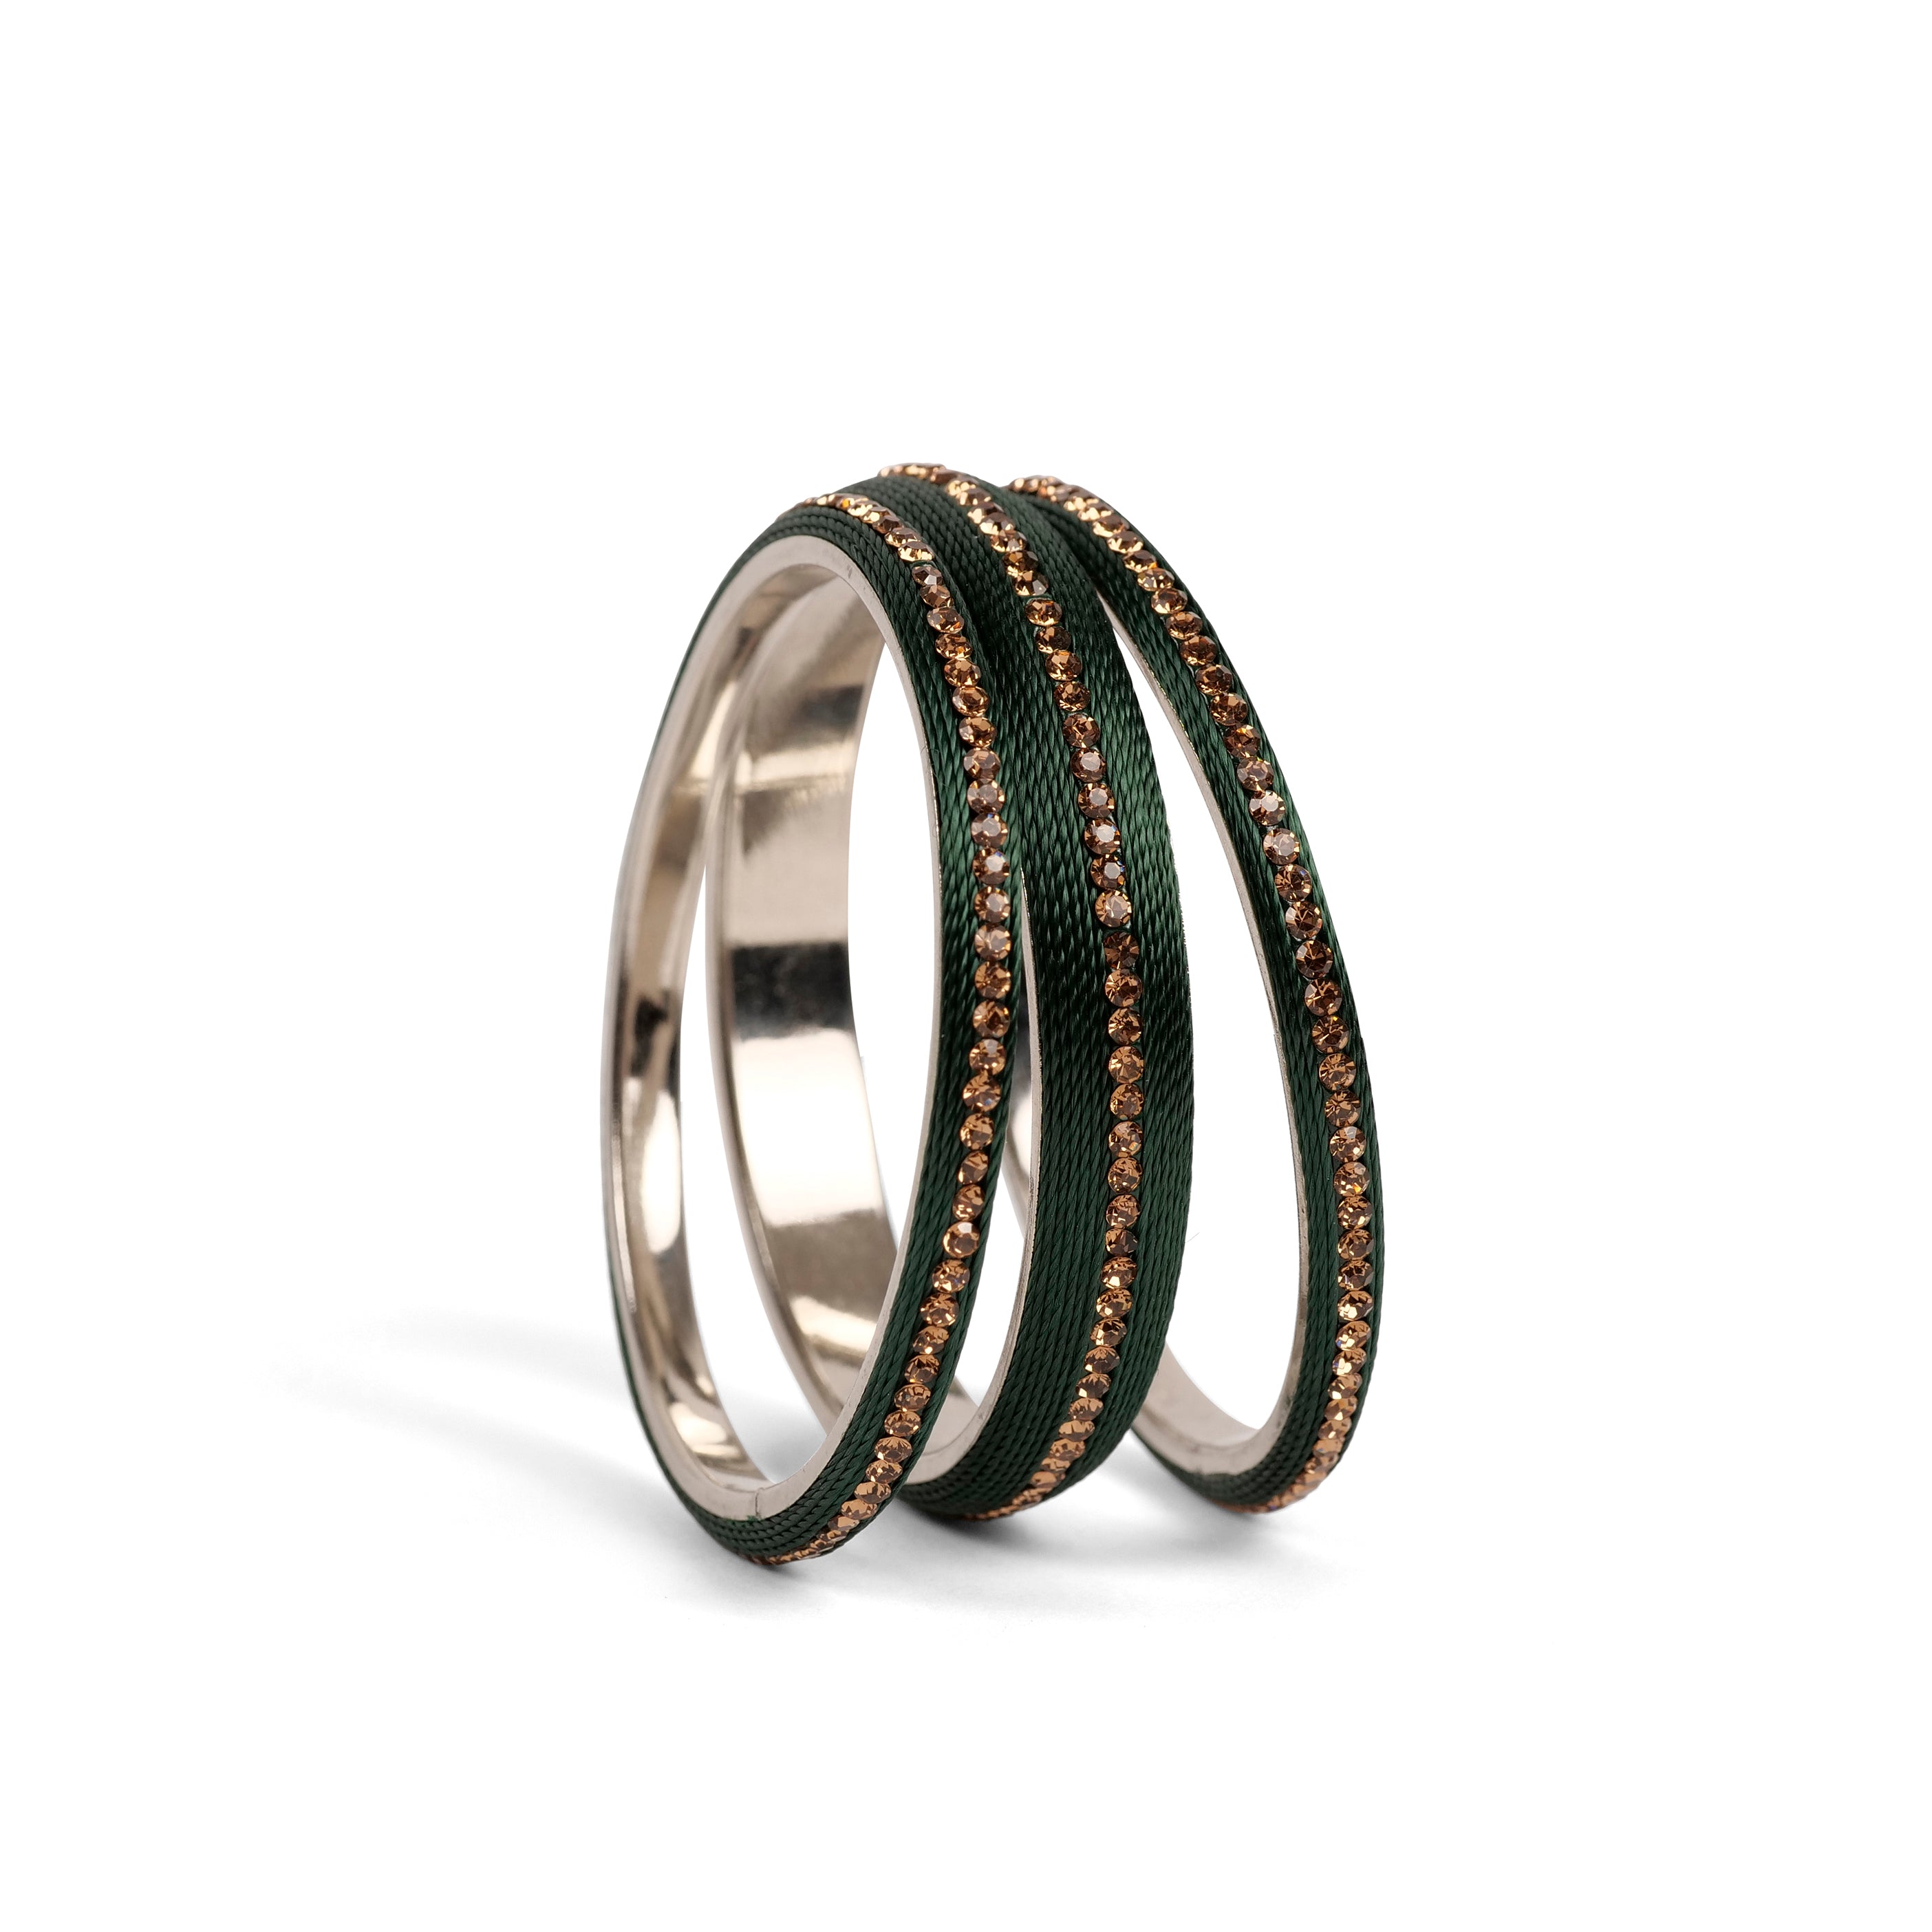 Set of 3 Thread Bangles in Green